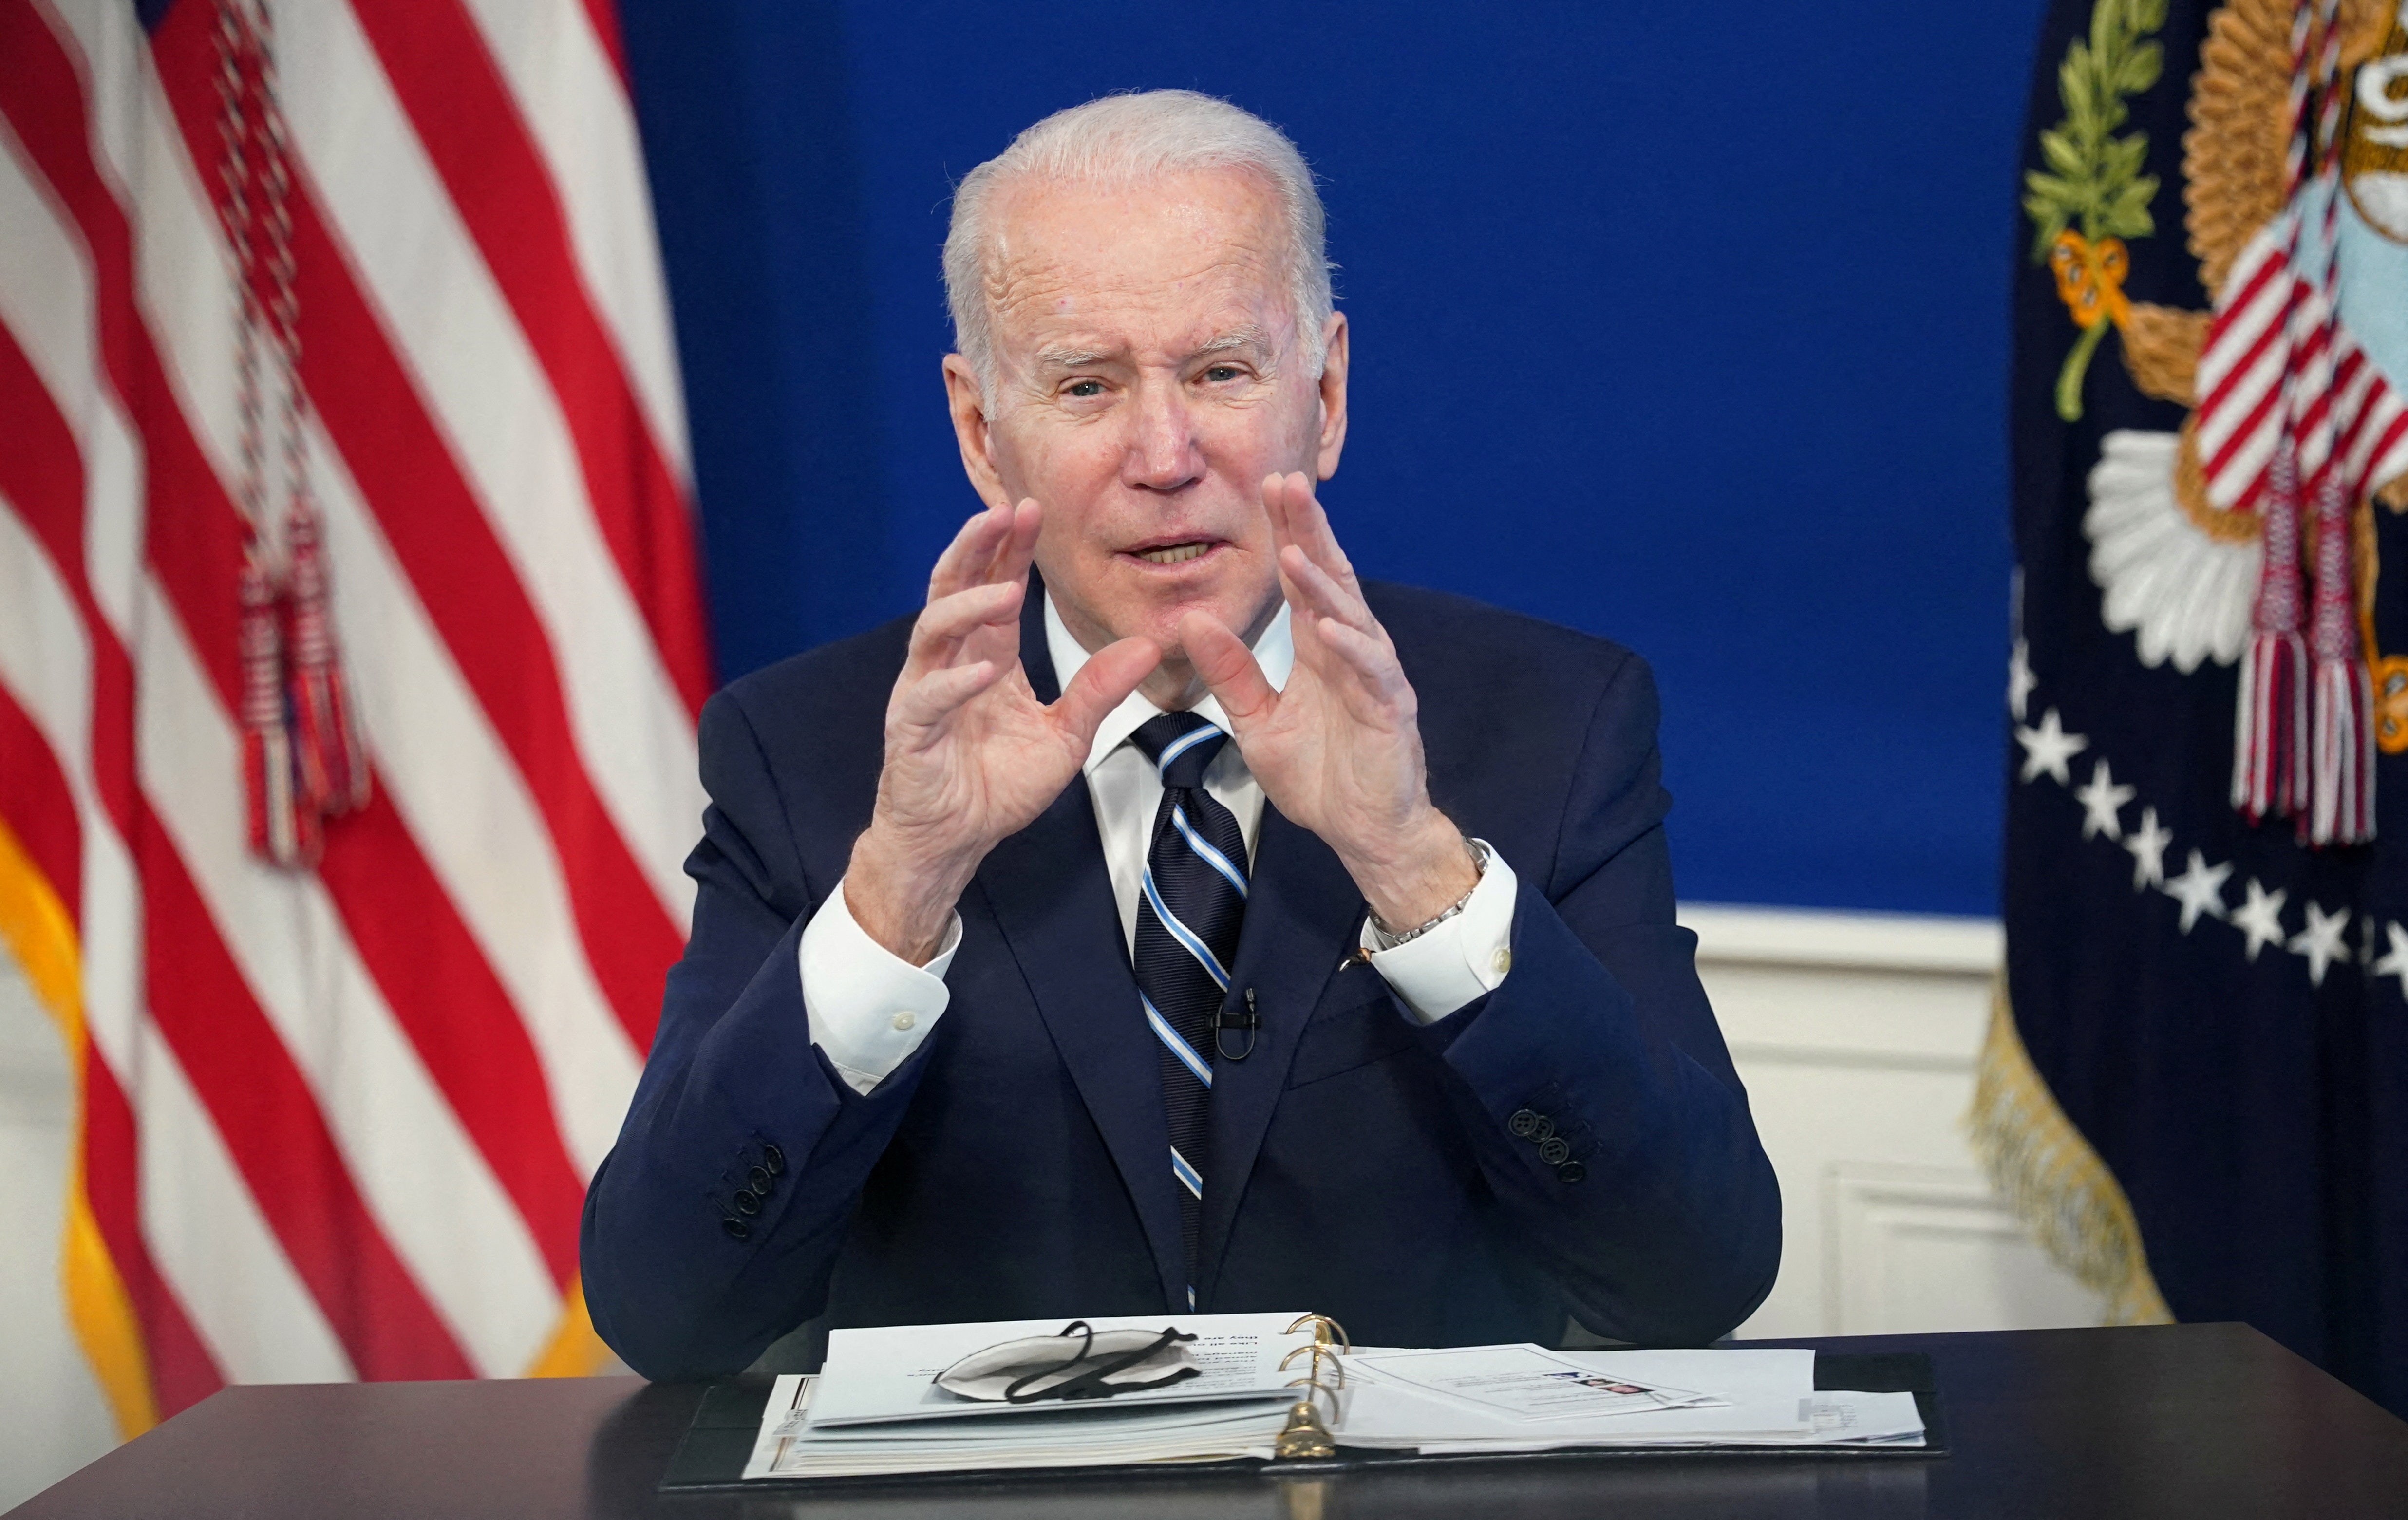 Biden White House pummeled for rollout of COVID tests expected to ship 'within 7-12 days of ordering'